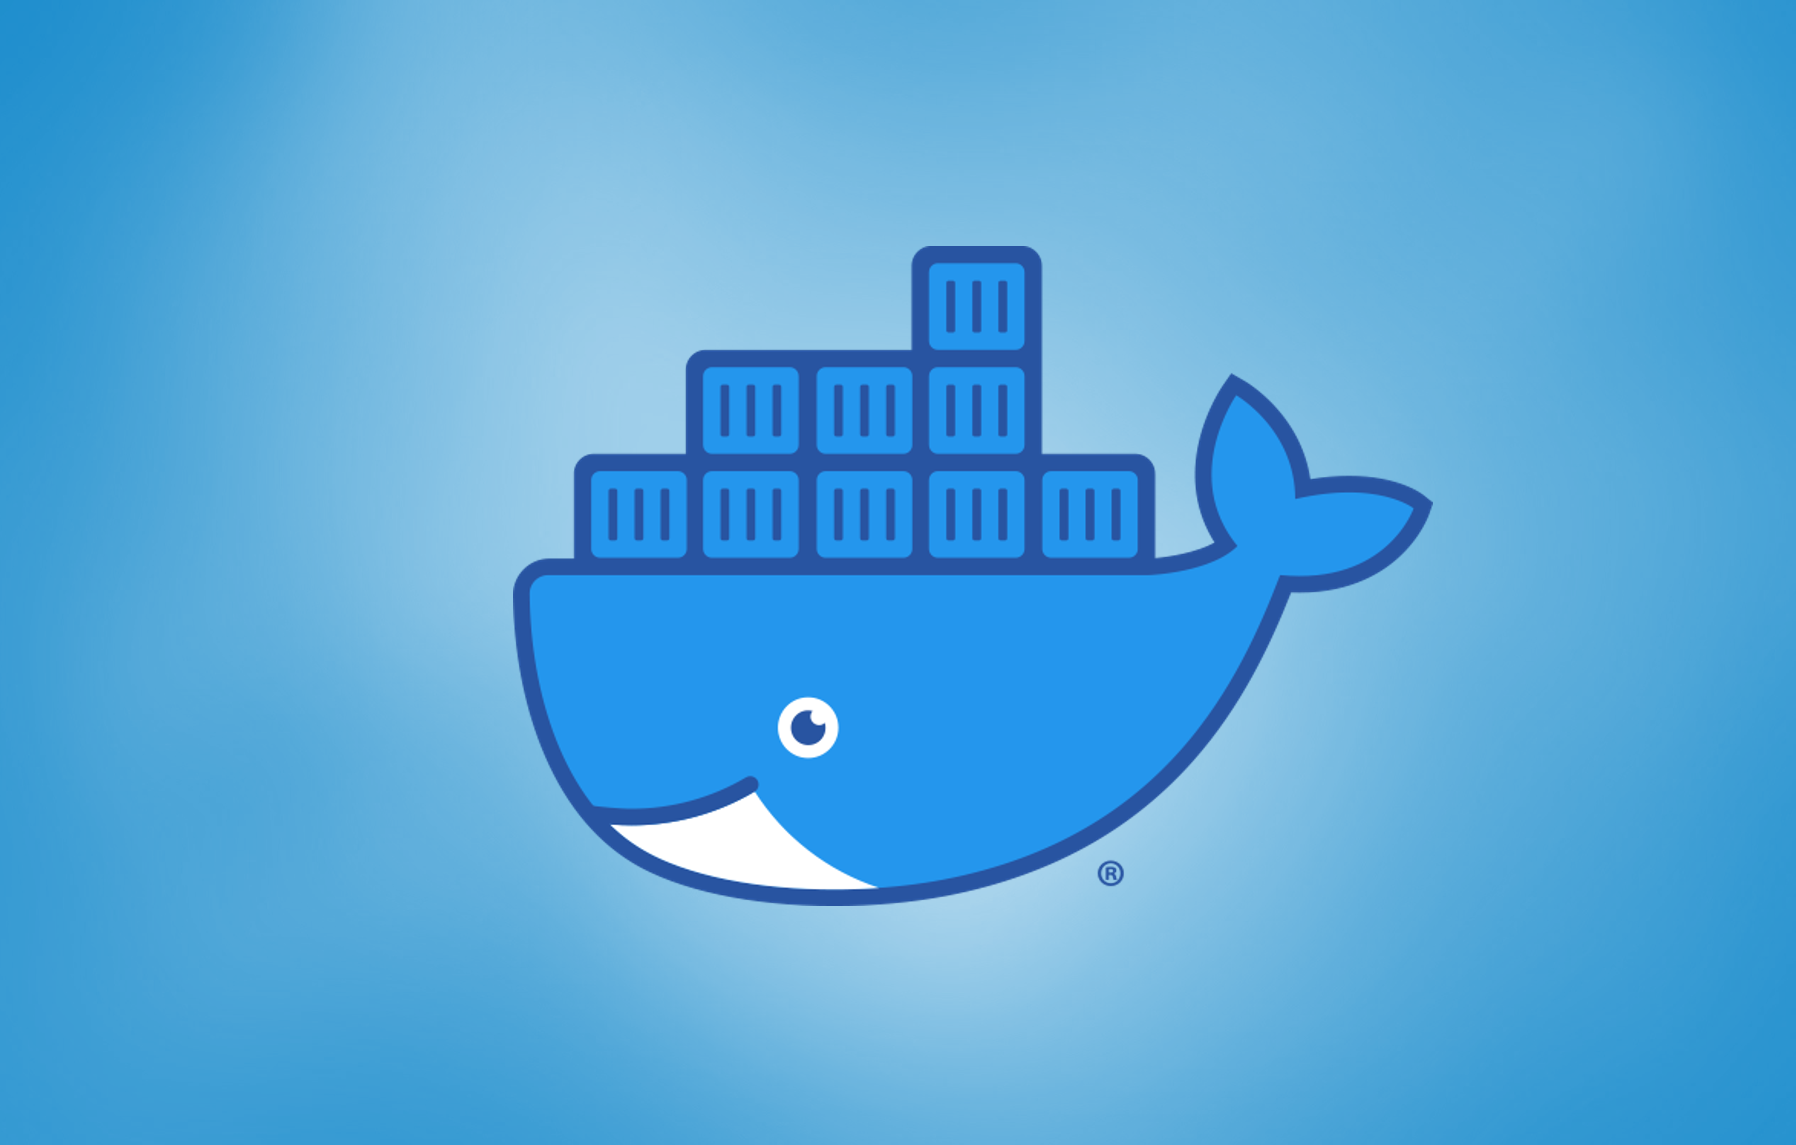 Docker CLI is the command-line interface for Docker. It allows you to interact with Docker daemon using commands. You can use Docker CLI to build, run, and manage Docker containers. In this tutorial, we will learn about some of the most commonly used Docker CLI commands.